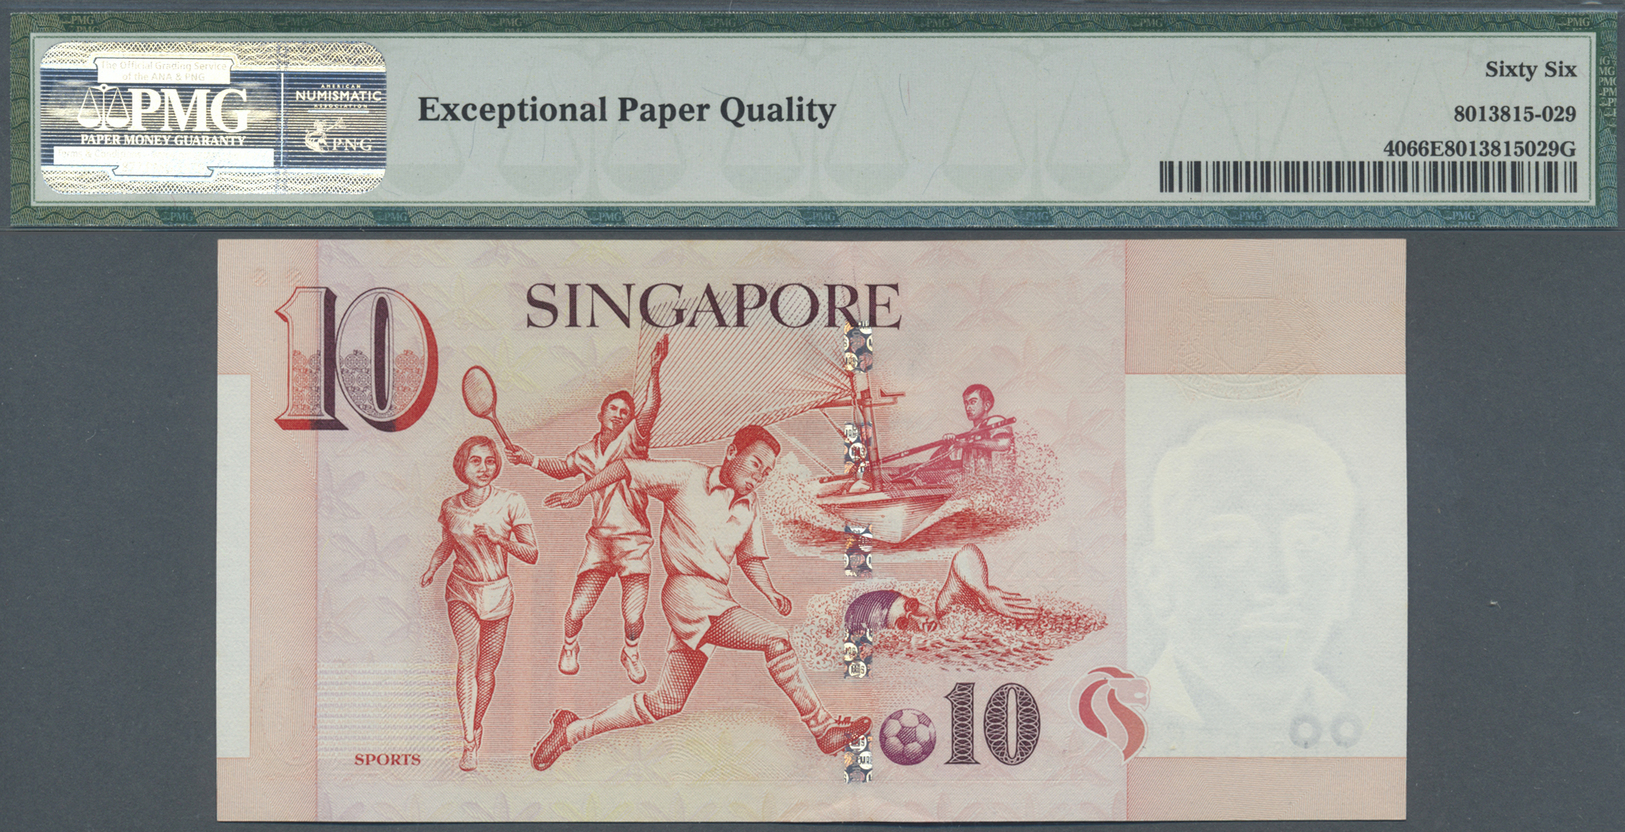 03566 Singapore / Singapur: large and rare set of 10 pcs 10 Dollars ND(1999) P. 40, all with special numbers and all PMG